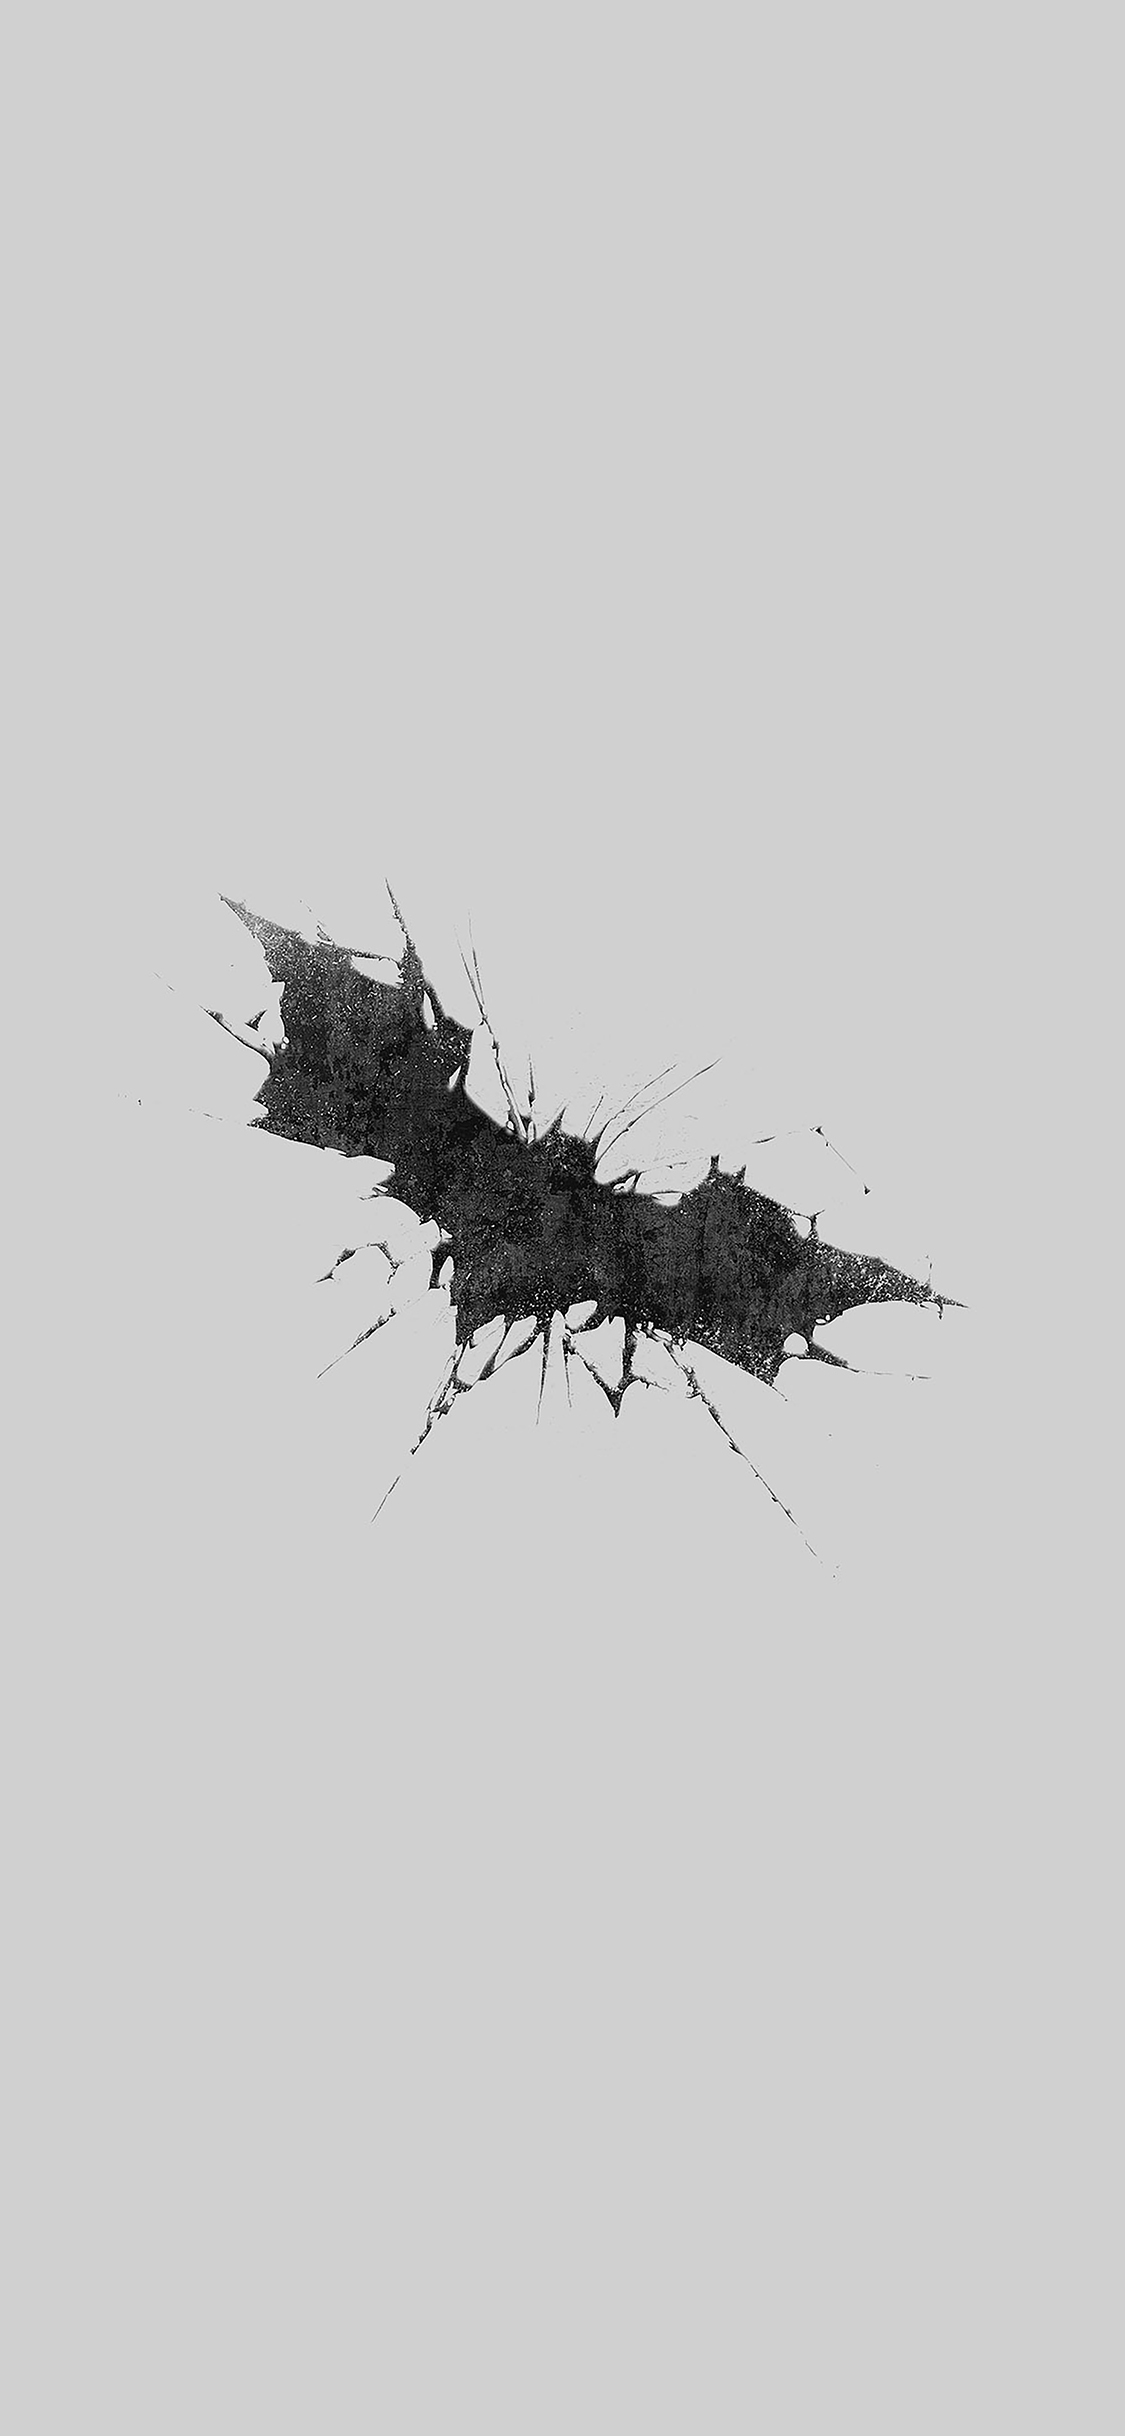 Free download The 5 best Batman logo wallpapers for iPhone [1125x2436] for  your Desktop, Mobile & Tablet | Explore 28+ The Batman Logo Wallpapers | Wallpaper  Batman Logo, The Batman Wallpaper, Batman Logo Wallpaper